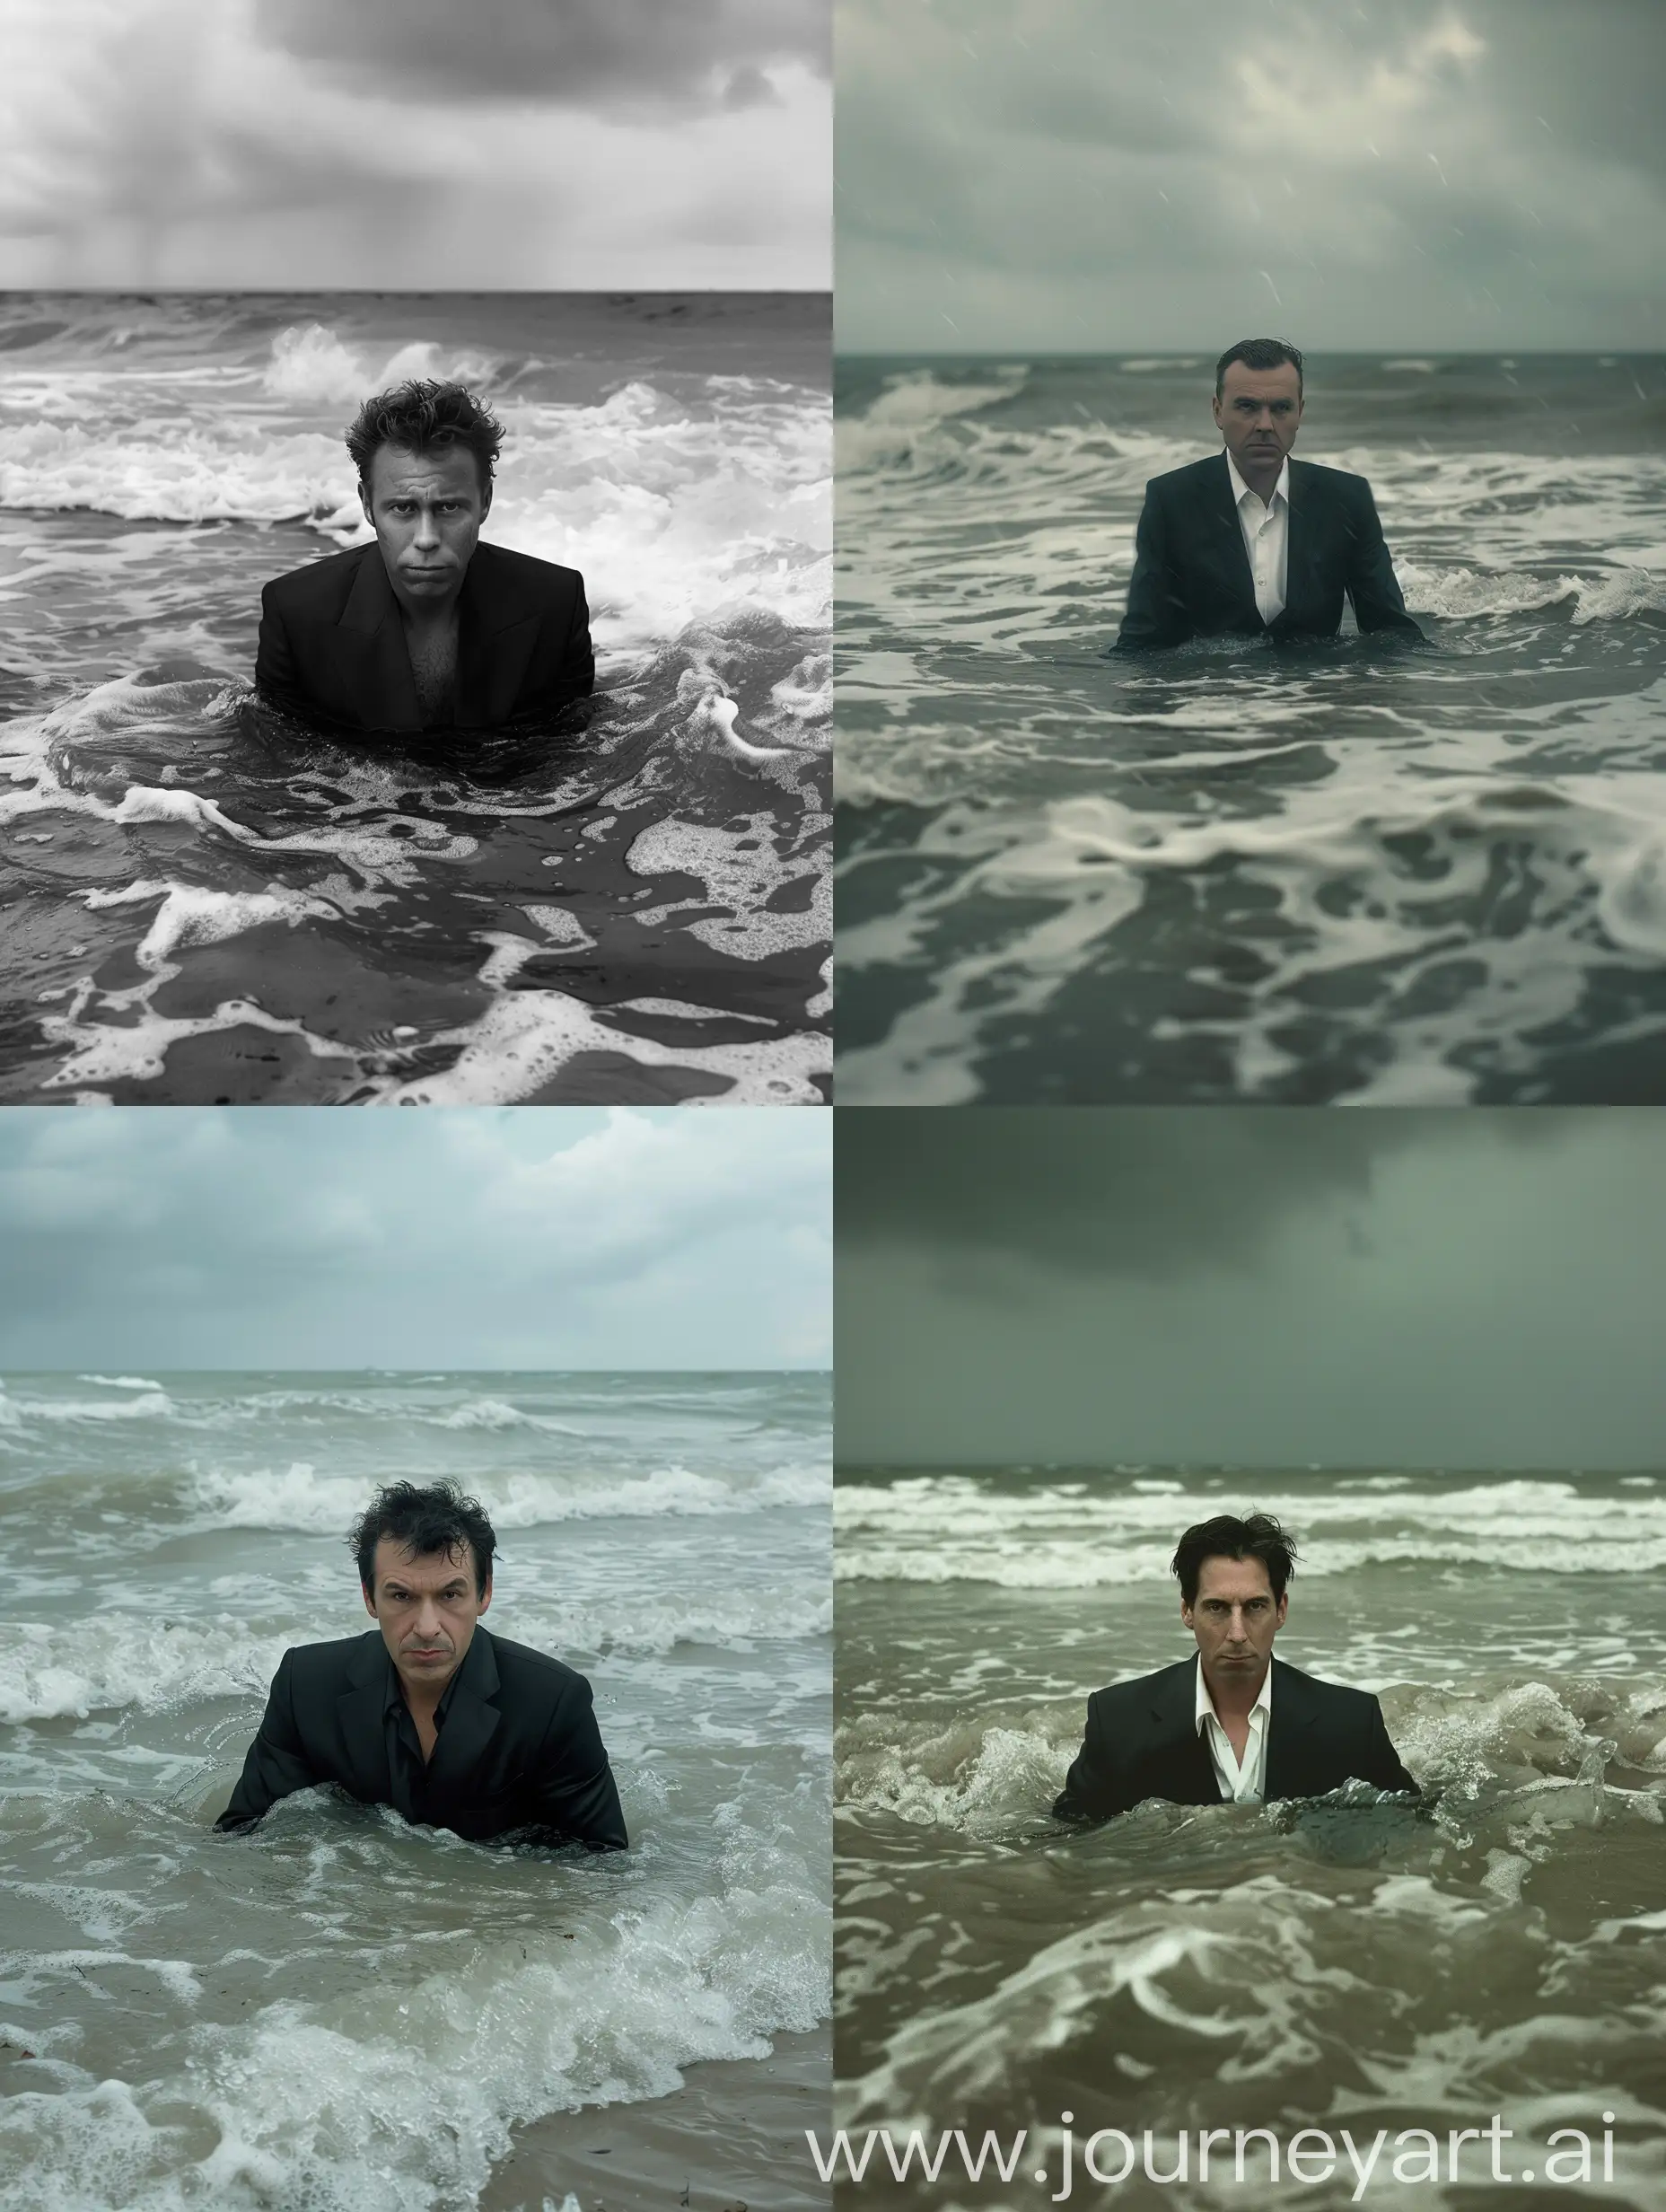 Mysterious-Man-in-Black-Suit-Standing-Firm-Against-Stormy-Seas